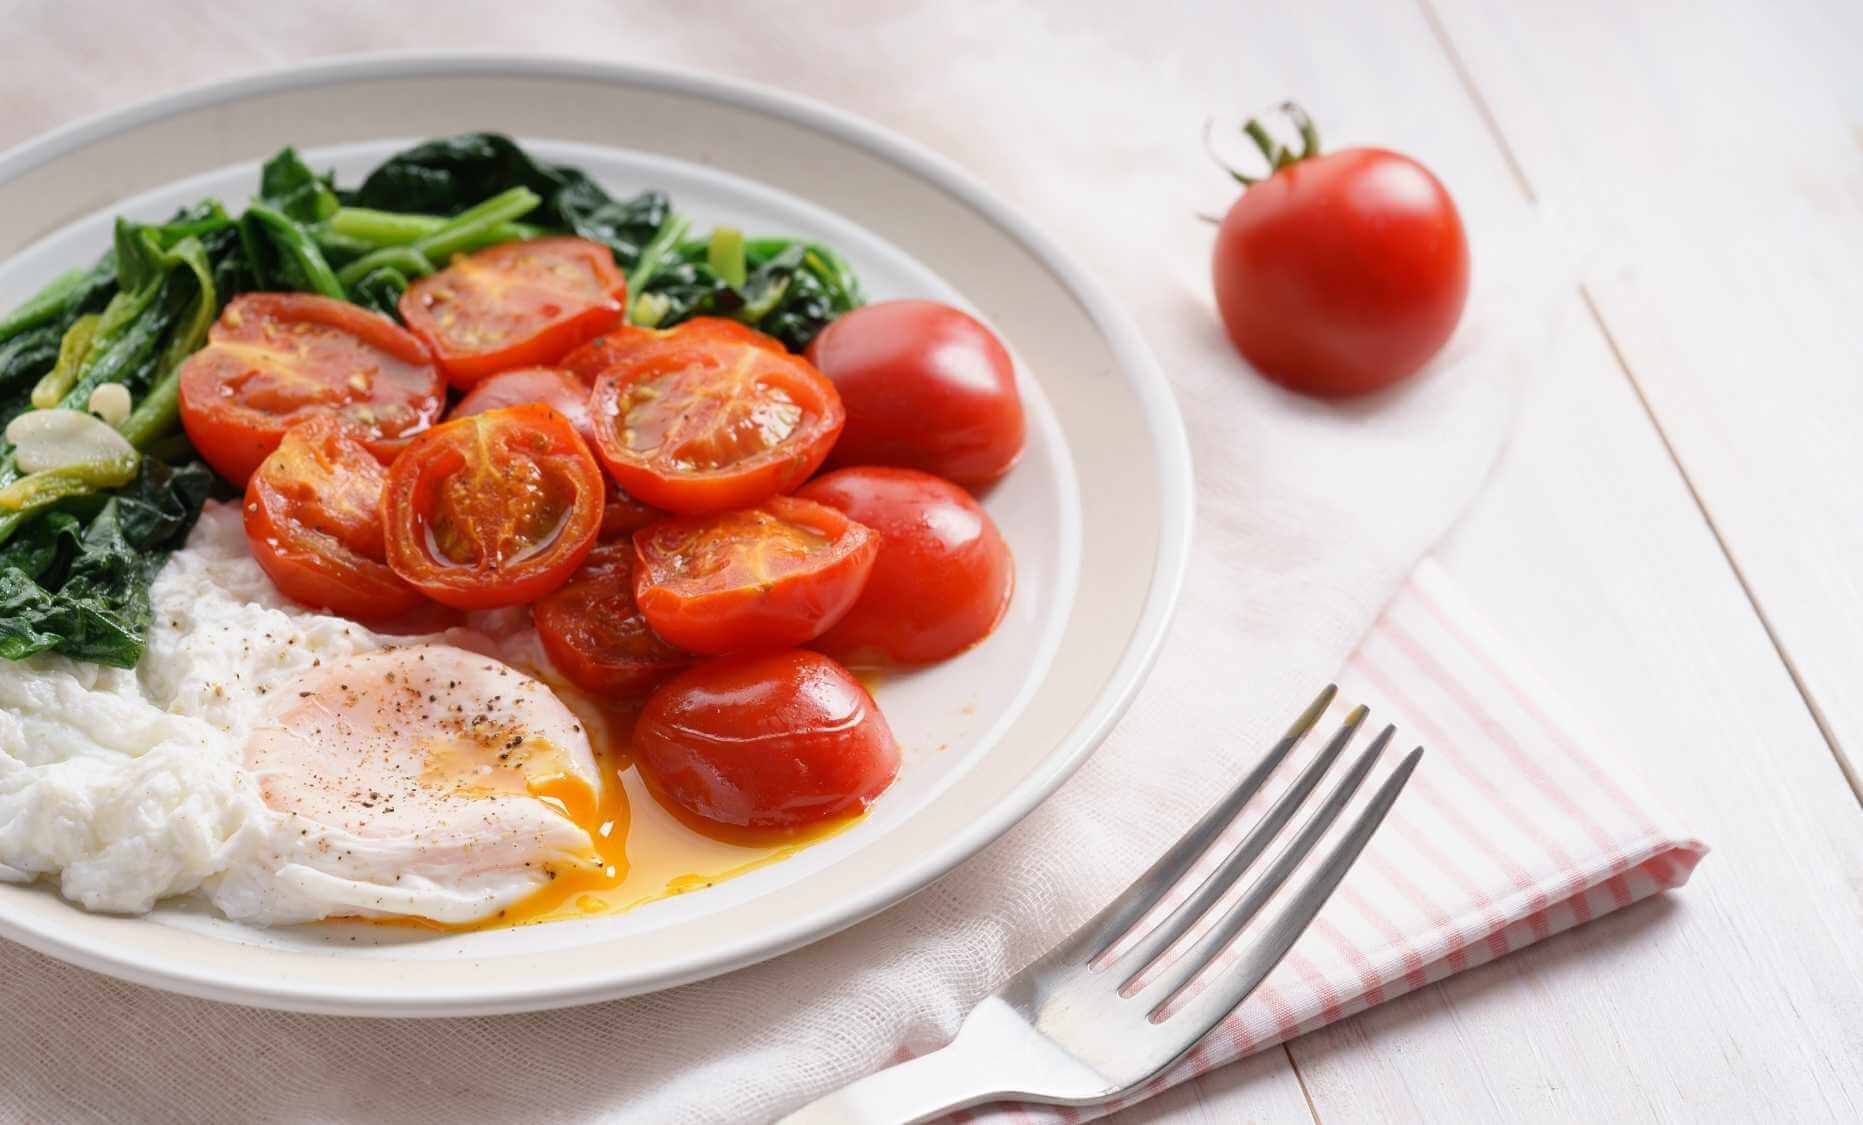 Poached Egg with Grilled Tomato